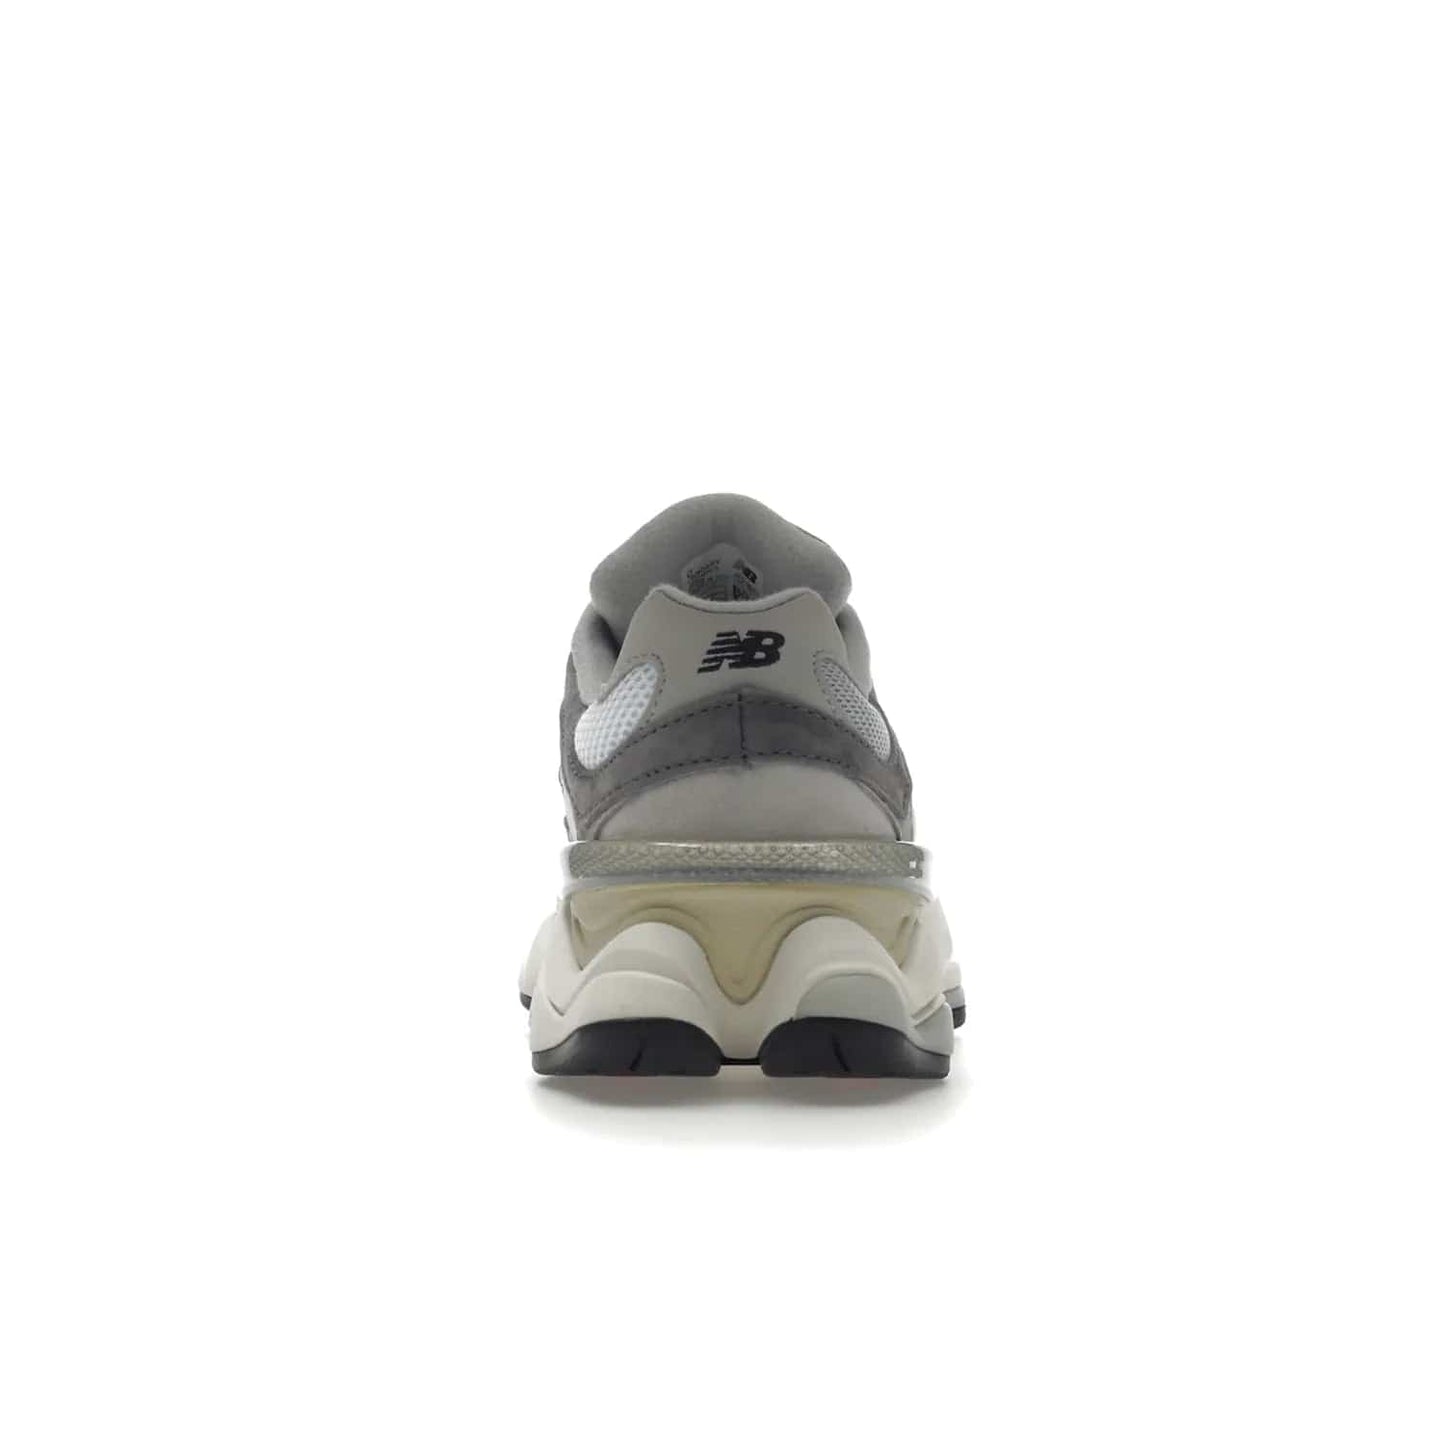 New Balance 9060 Rain Cloud Grey - Image 28 - Only at www.BallersClubKickz.com - New Balance 9060 Rain Cloud Grey is an early 2000s design with grey and off-white tones. Pigskin suede, mesh, and silver accents. "N" emblem and dual-density midsole on diamond outsole. ABZORB technology cushioning. September 2nd release for $150.